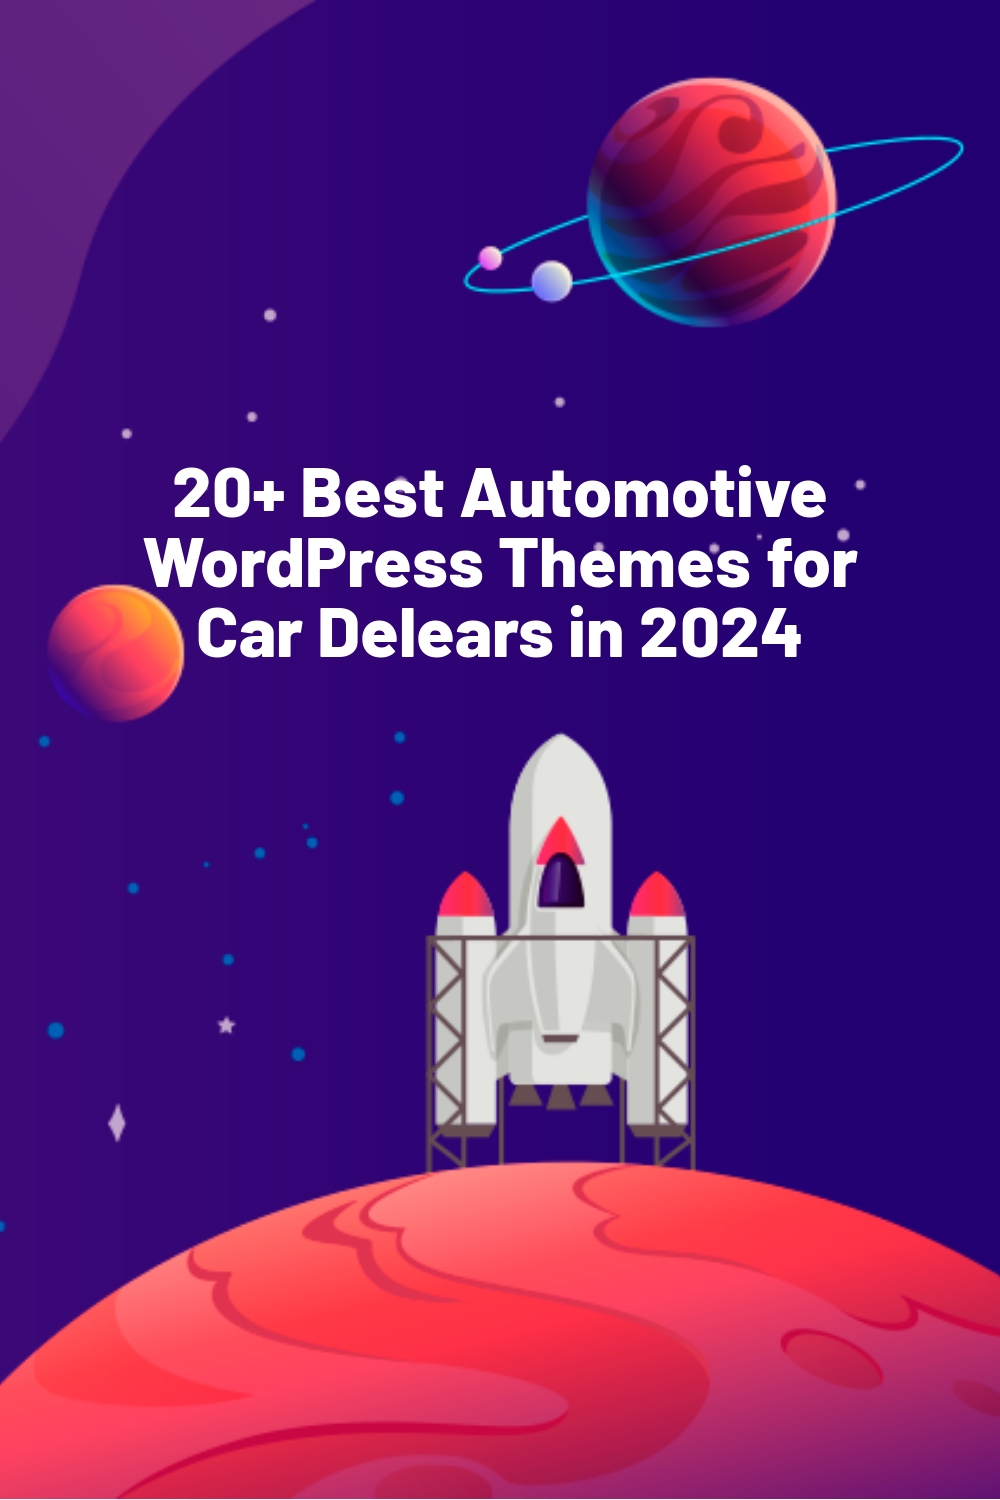 20+ Best Automotive WordPress Themes for Car Delears in 2024